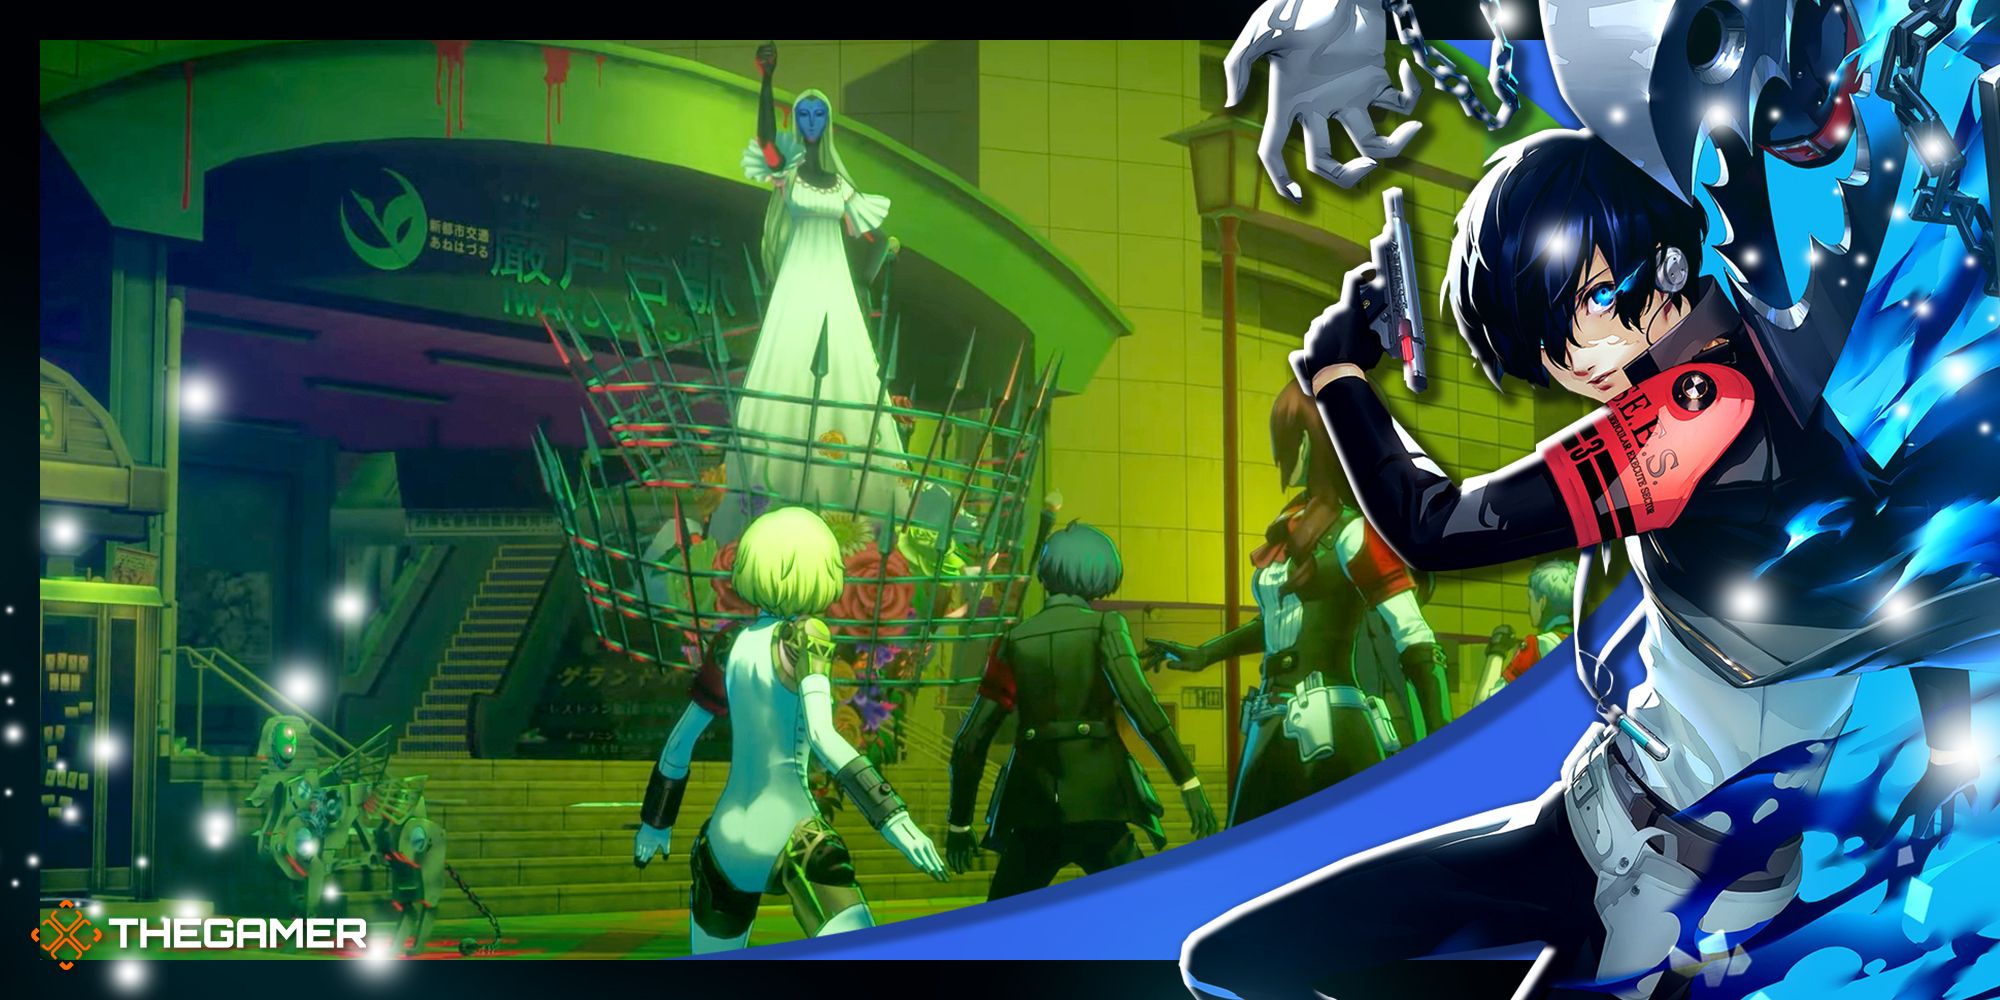 Game images from Persona 3 Reload.